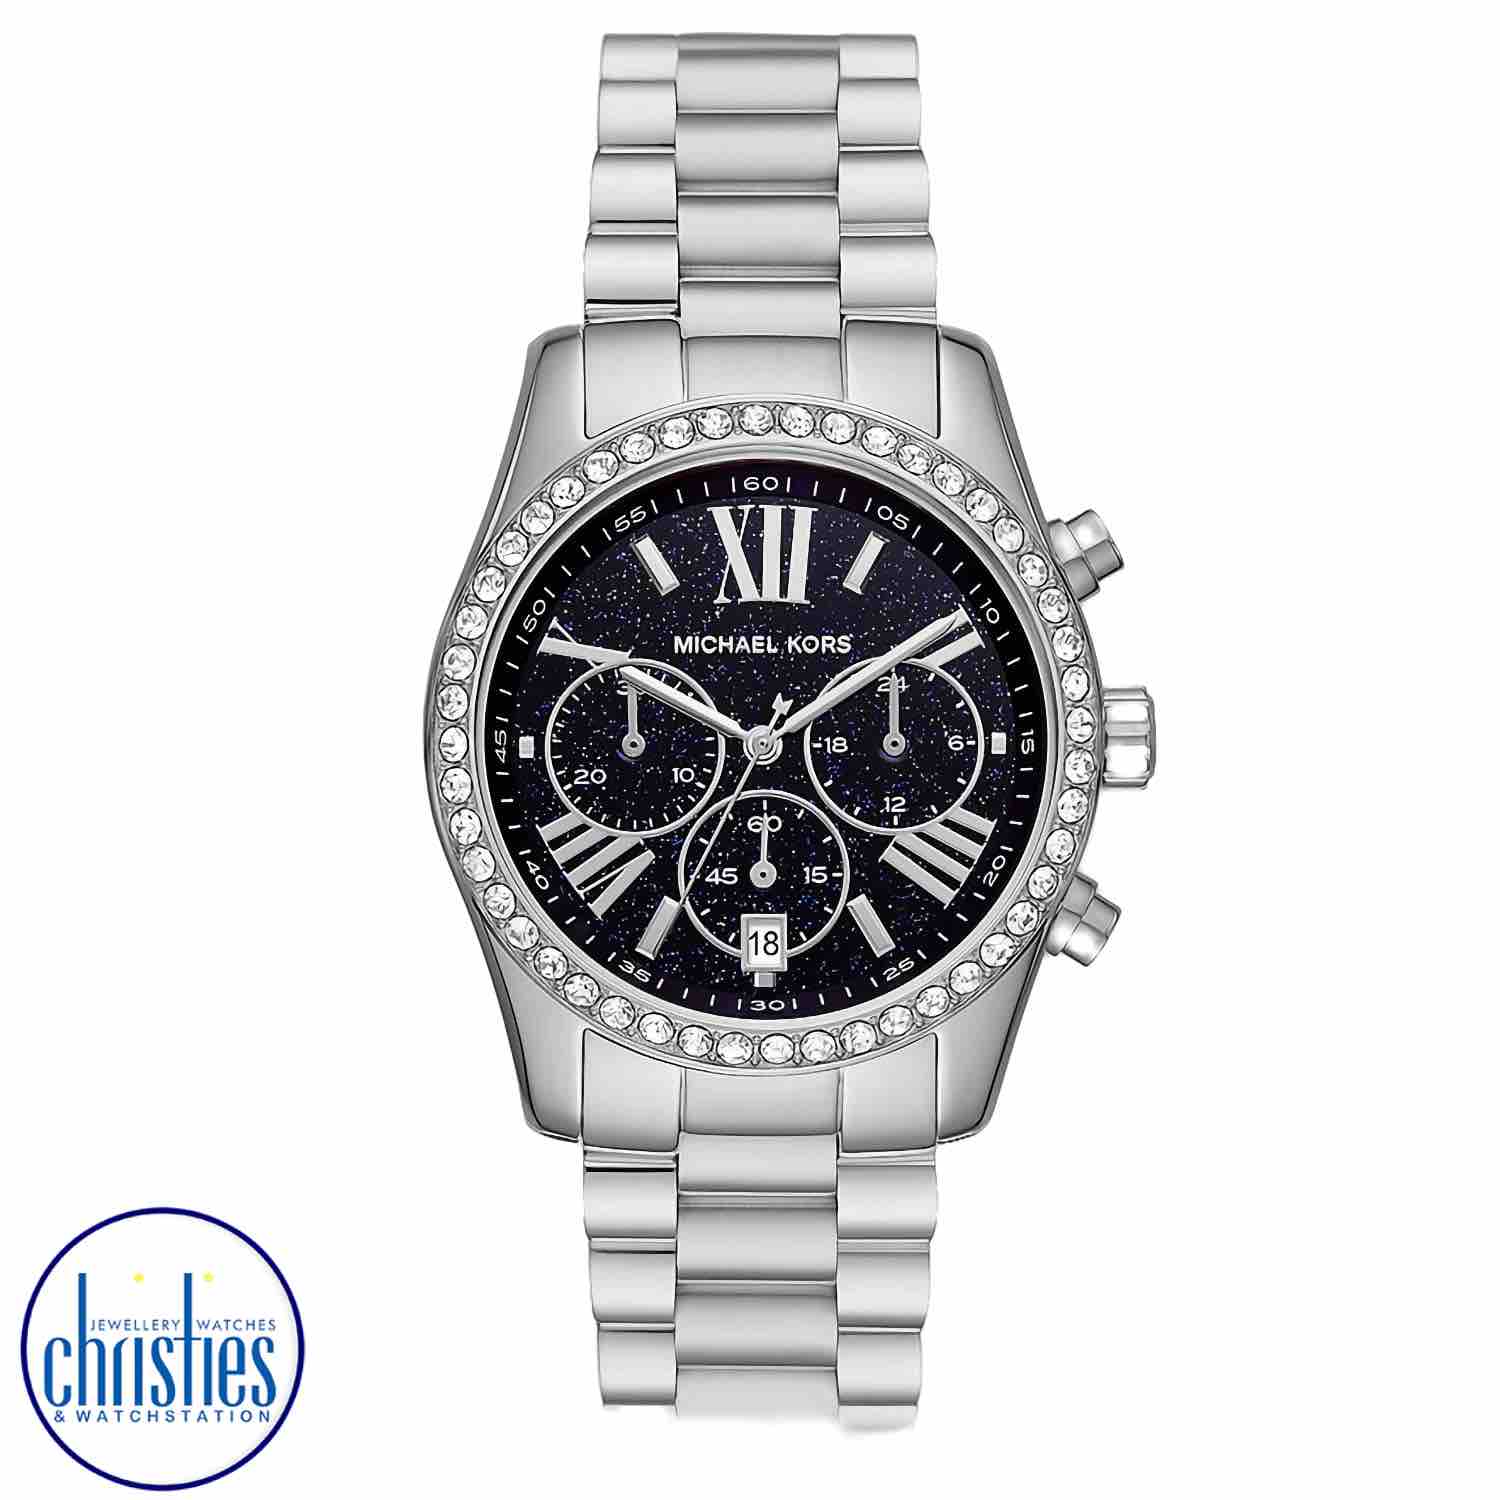 MK7277 Michael Kors Lexington Lux Chronograph Watch. MK7277 Michael Kors Lexington Lux Chronograph Stainless Steel Watch Afterpay - Split your purchase into 4 instalments - Pay for your purchase over 4 instalments, due every two weeks.